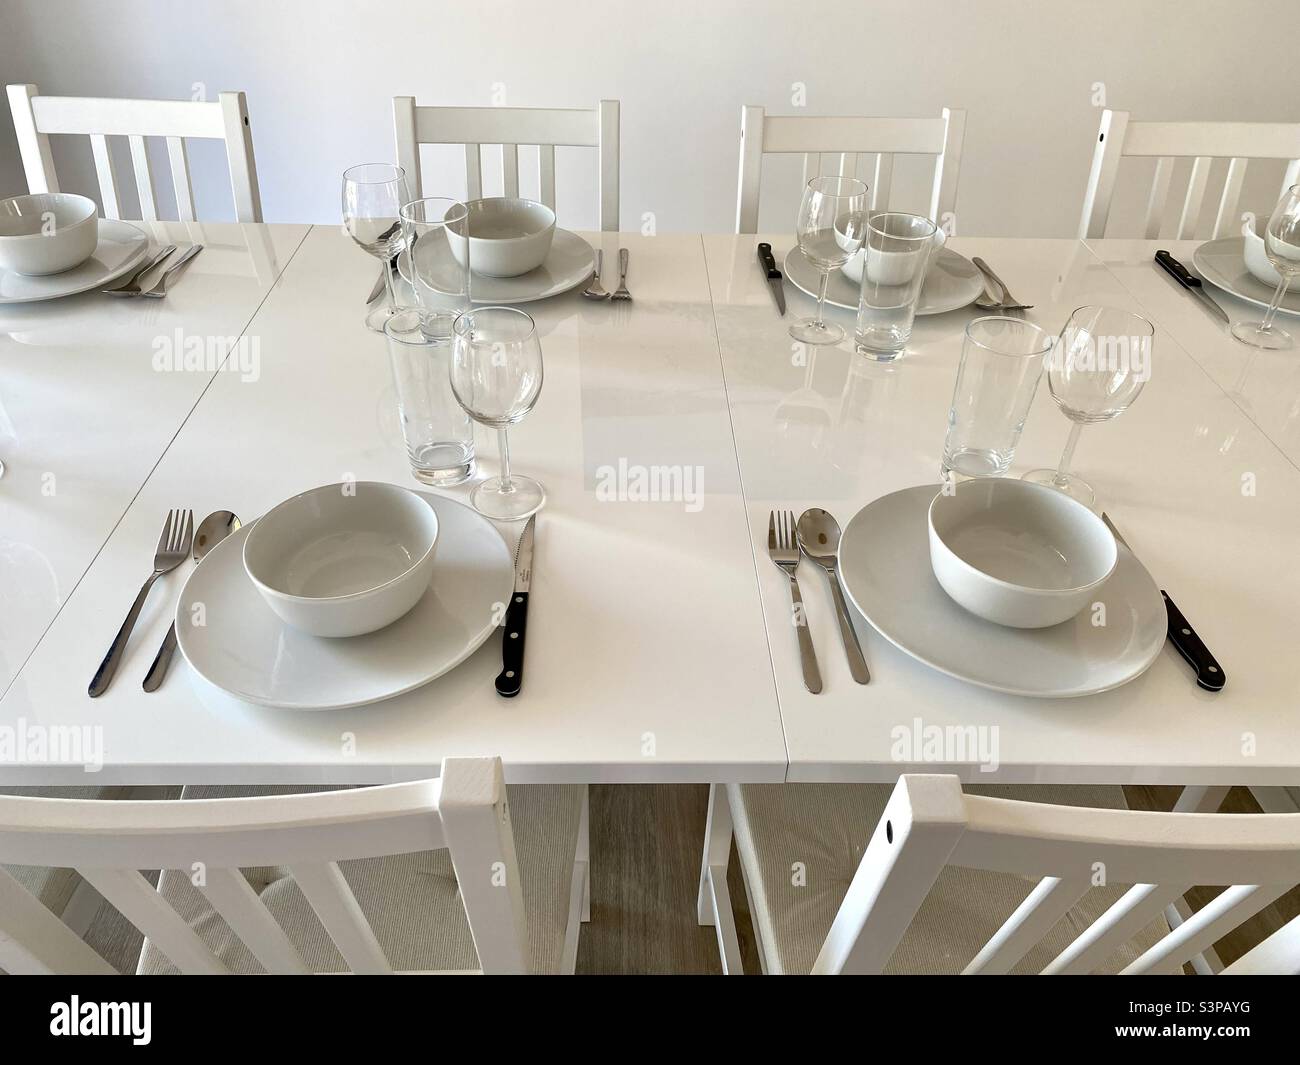 Laid table with several place settingswhite furniture Stock Photo